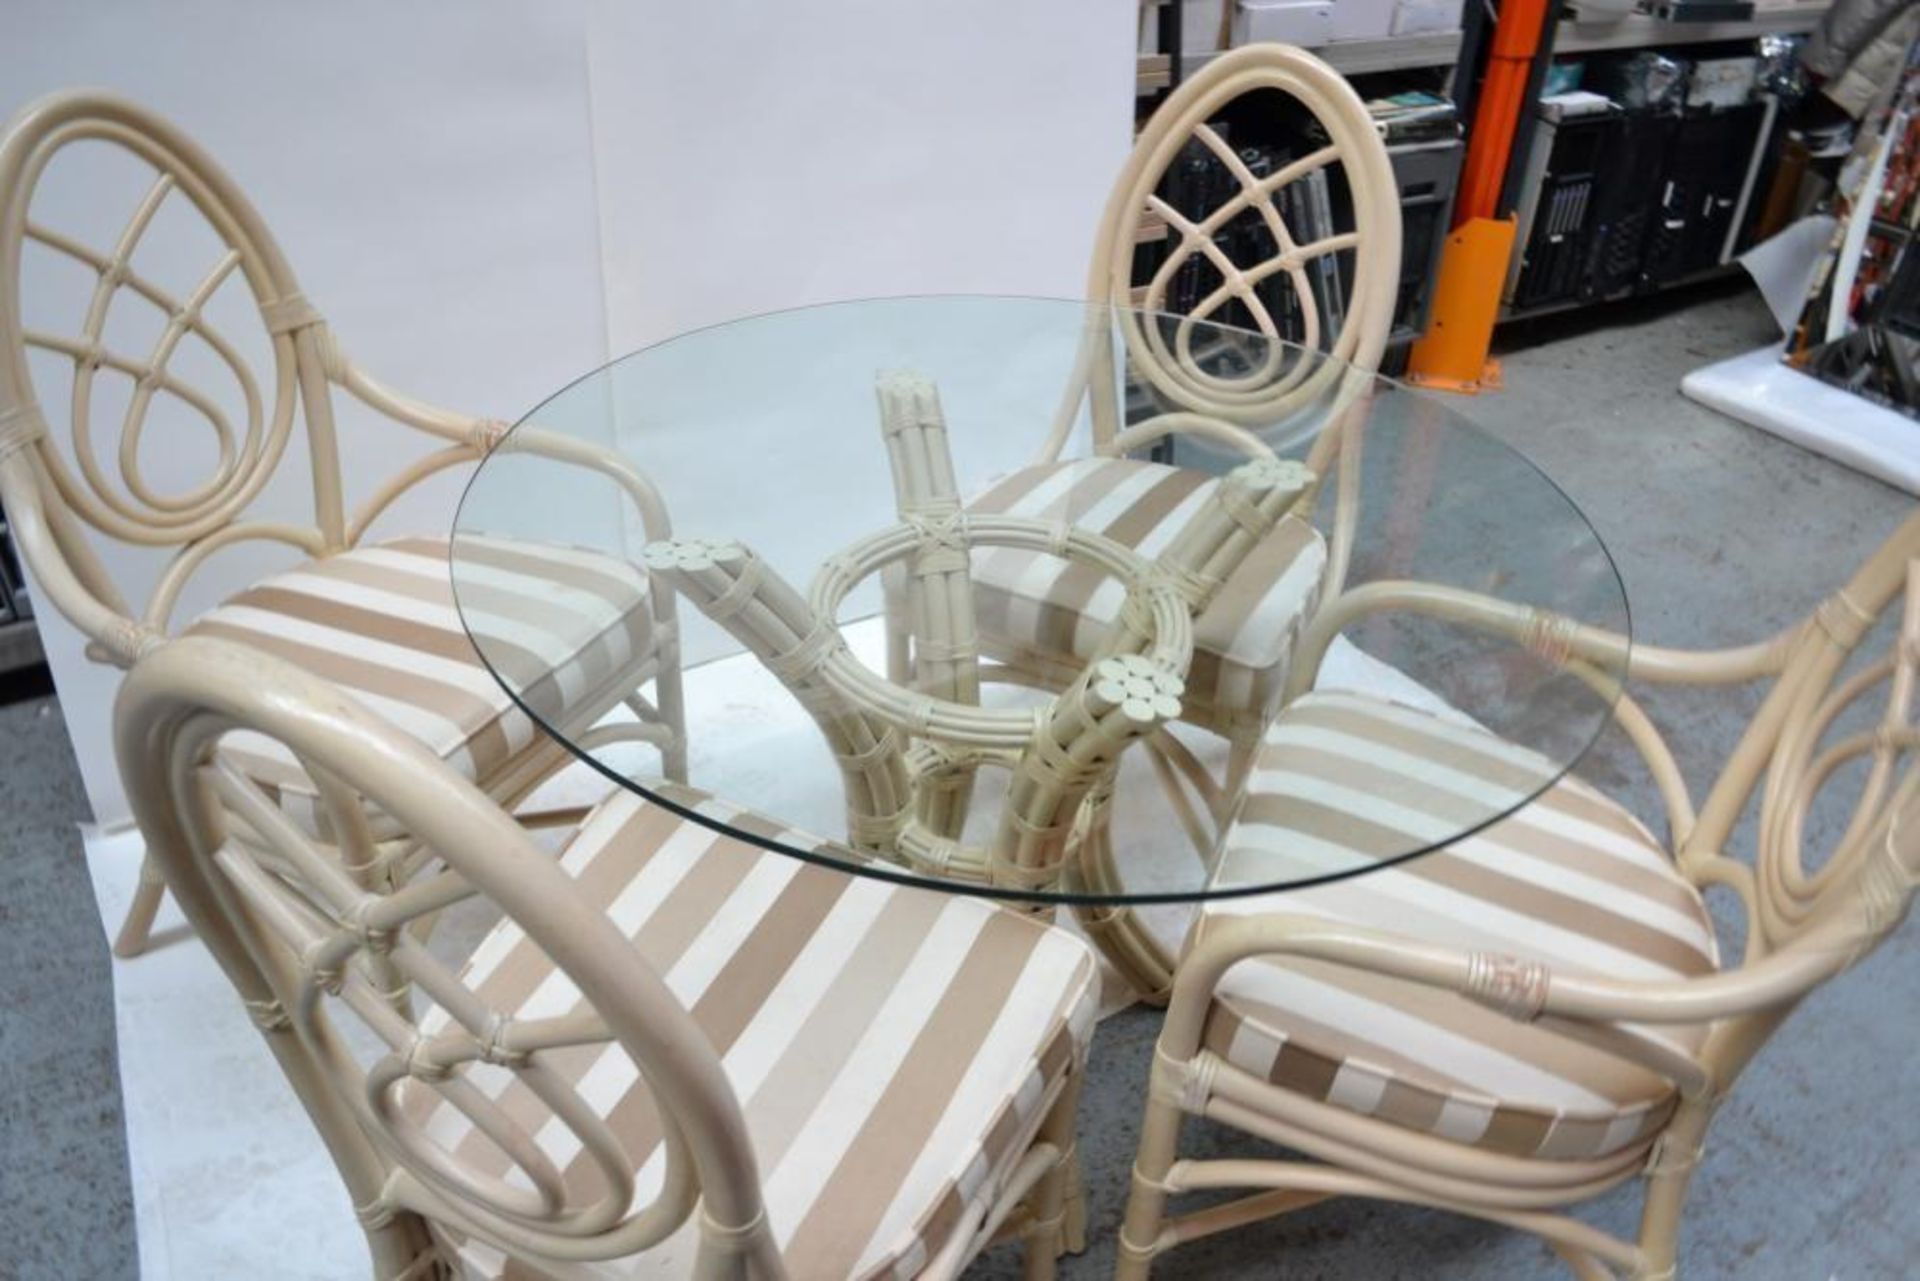 1 x Glass Topped Cane Table with 4 Chairs - Pre-owned In Good Condition - AE010 - CL007 - - Image 8 of 13